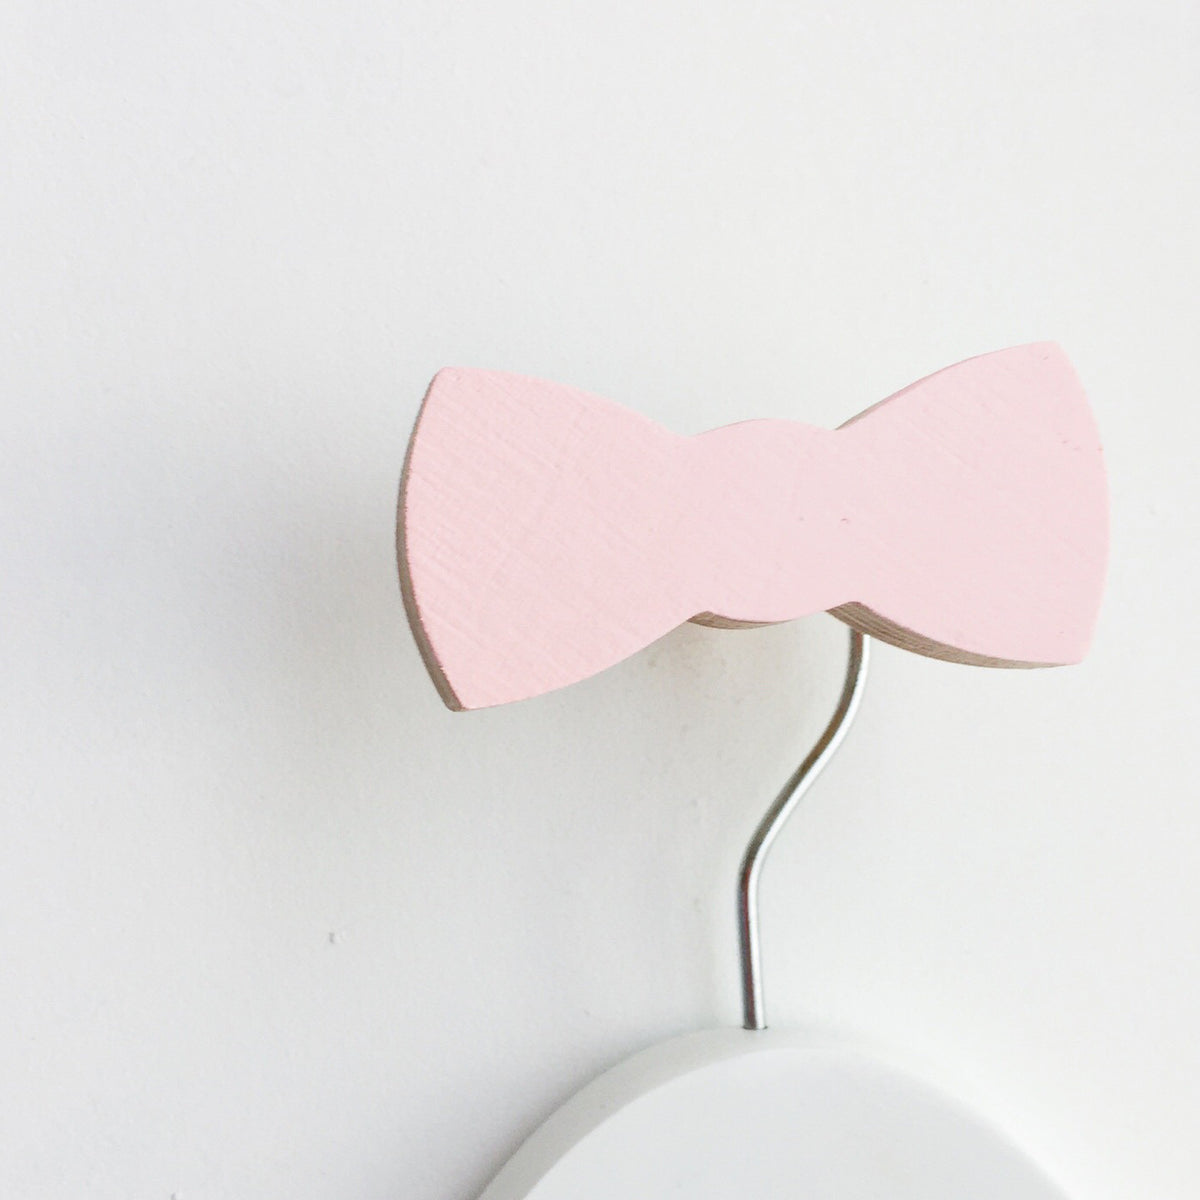 Bow Tie Wall Hook